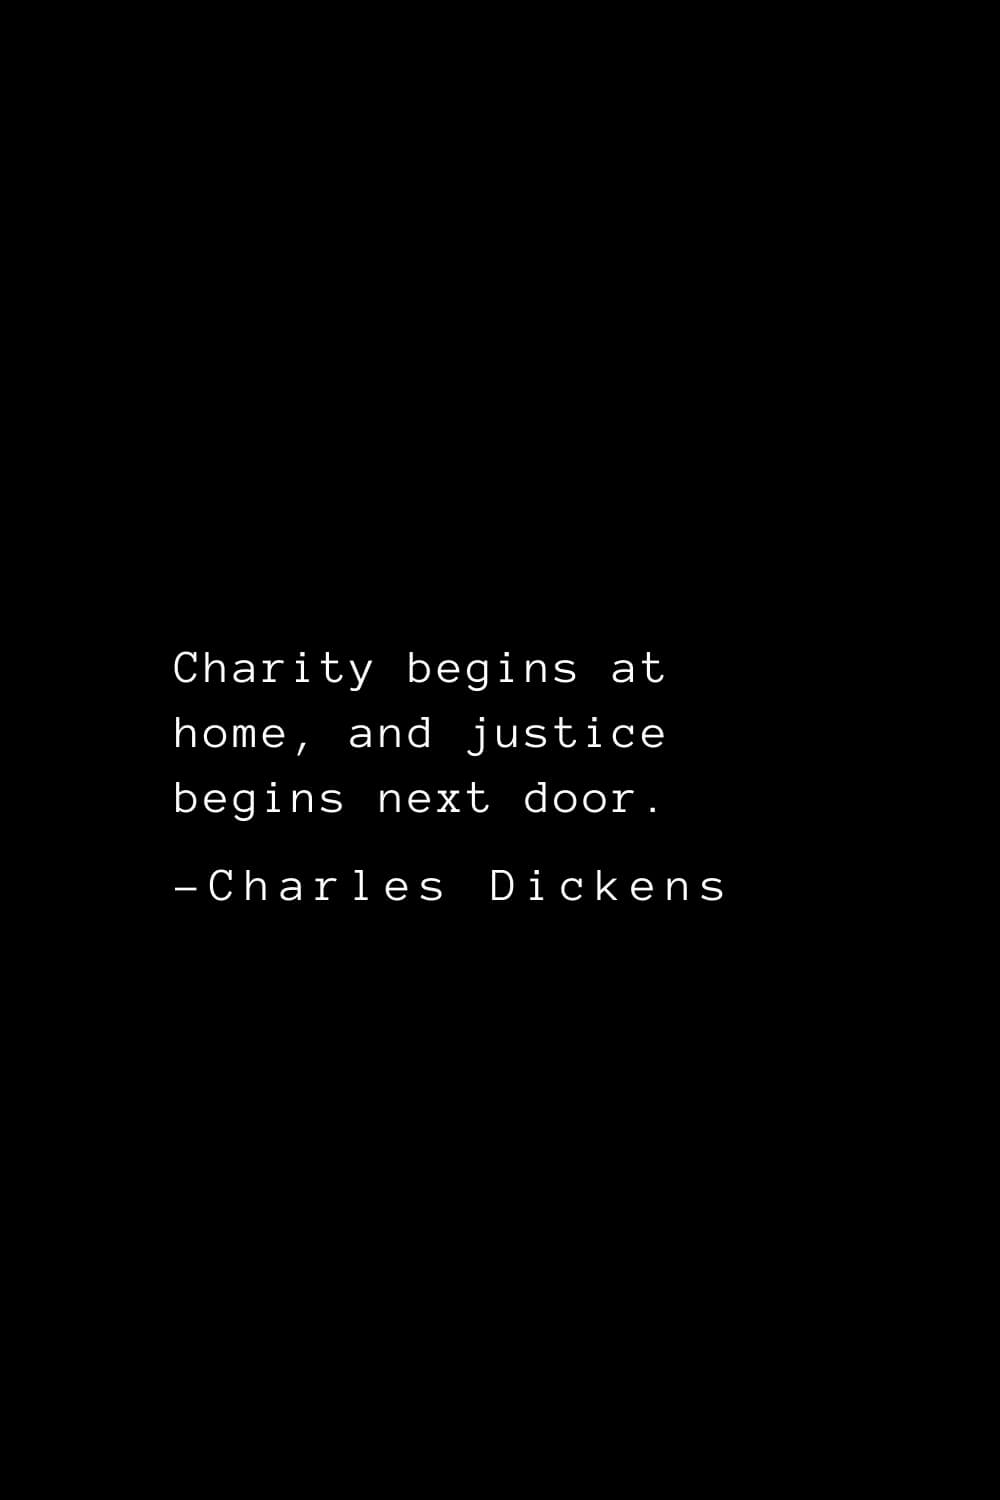 75 Beautiful Charles Dickens Quotes About Life and Happiness